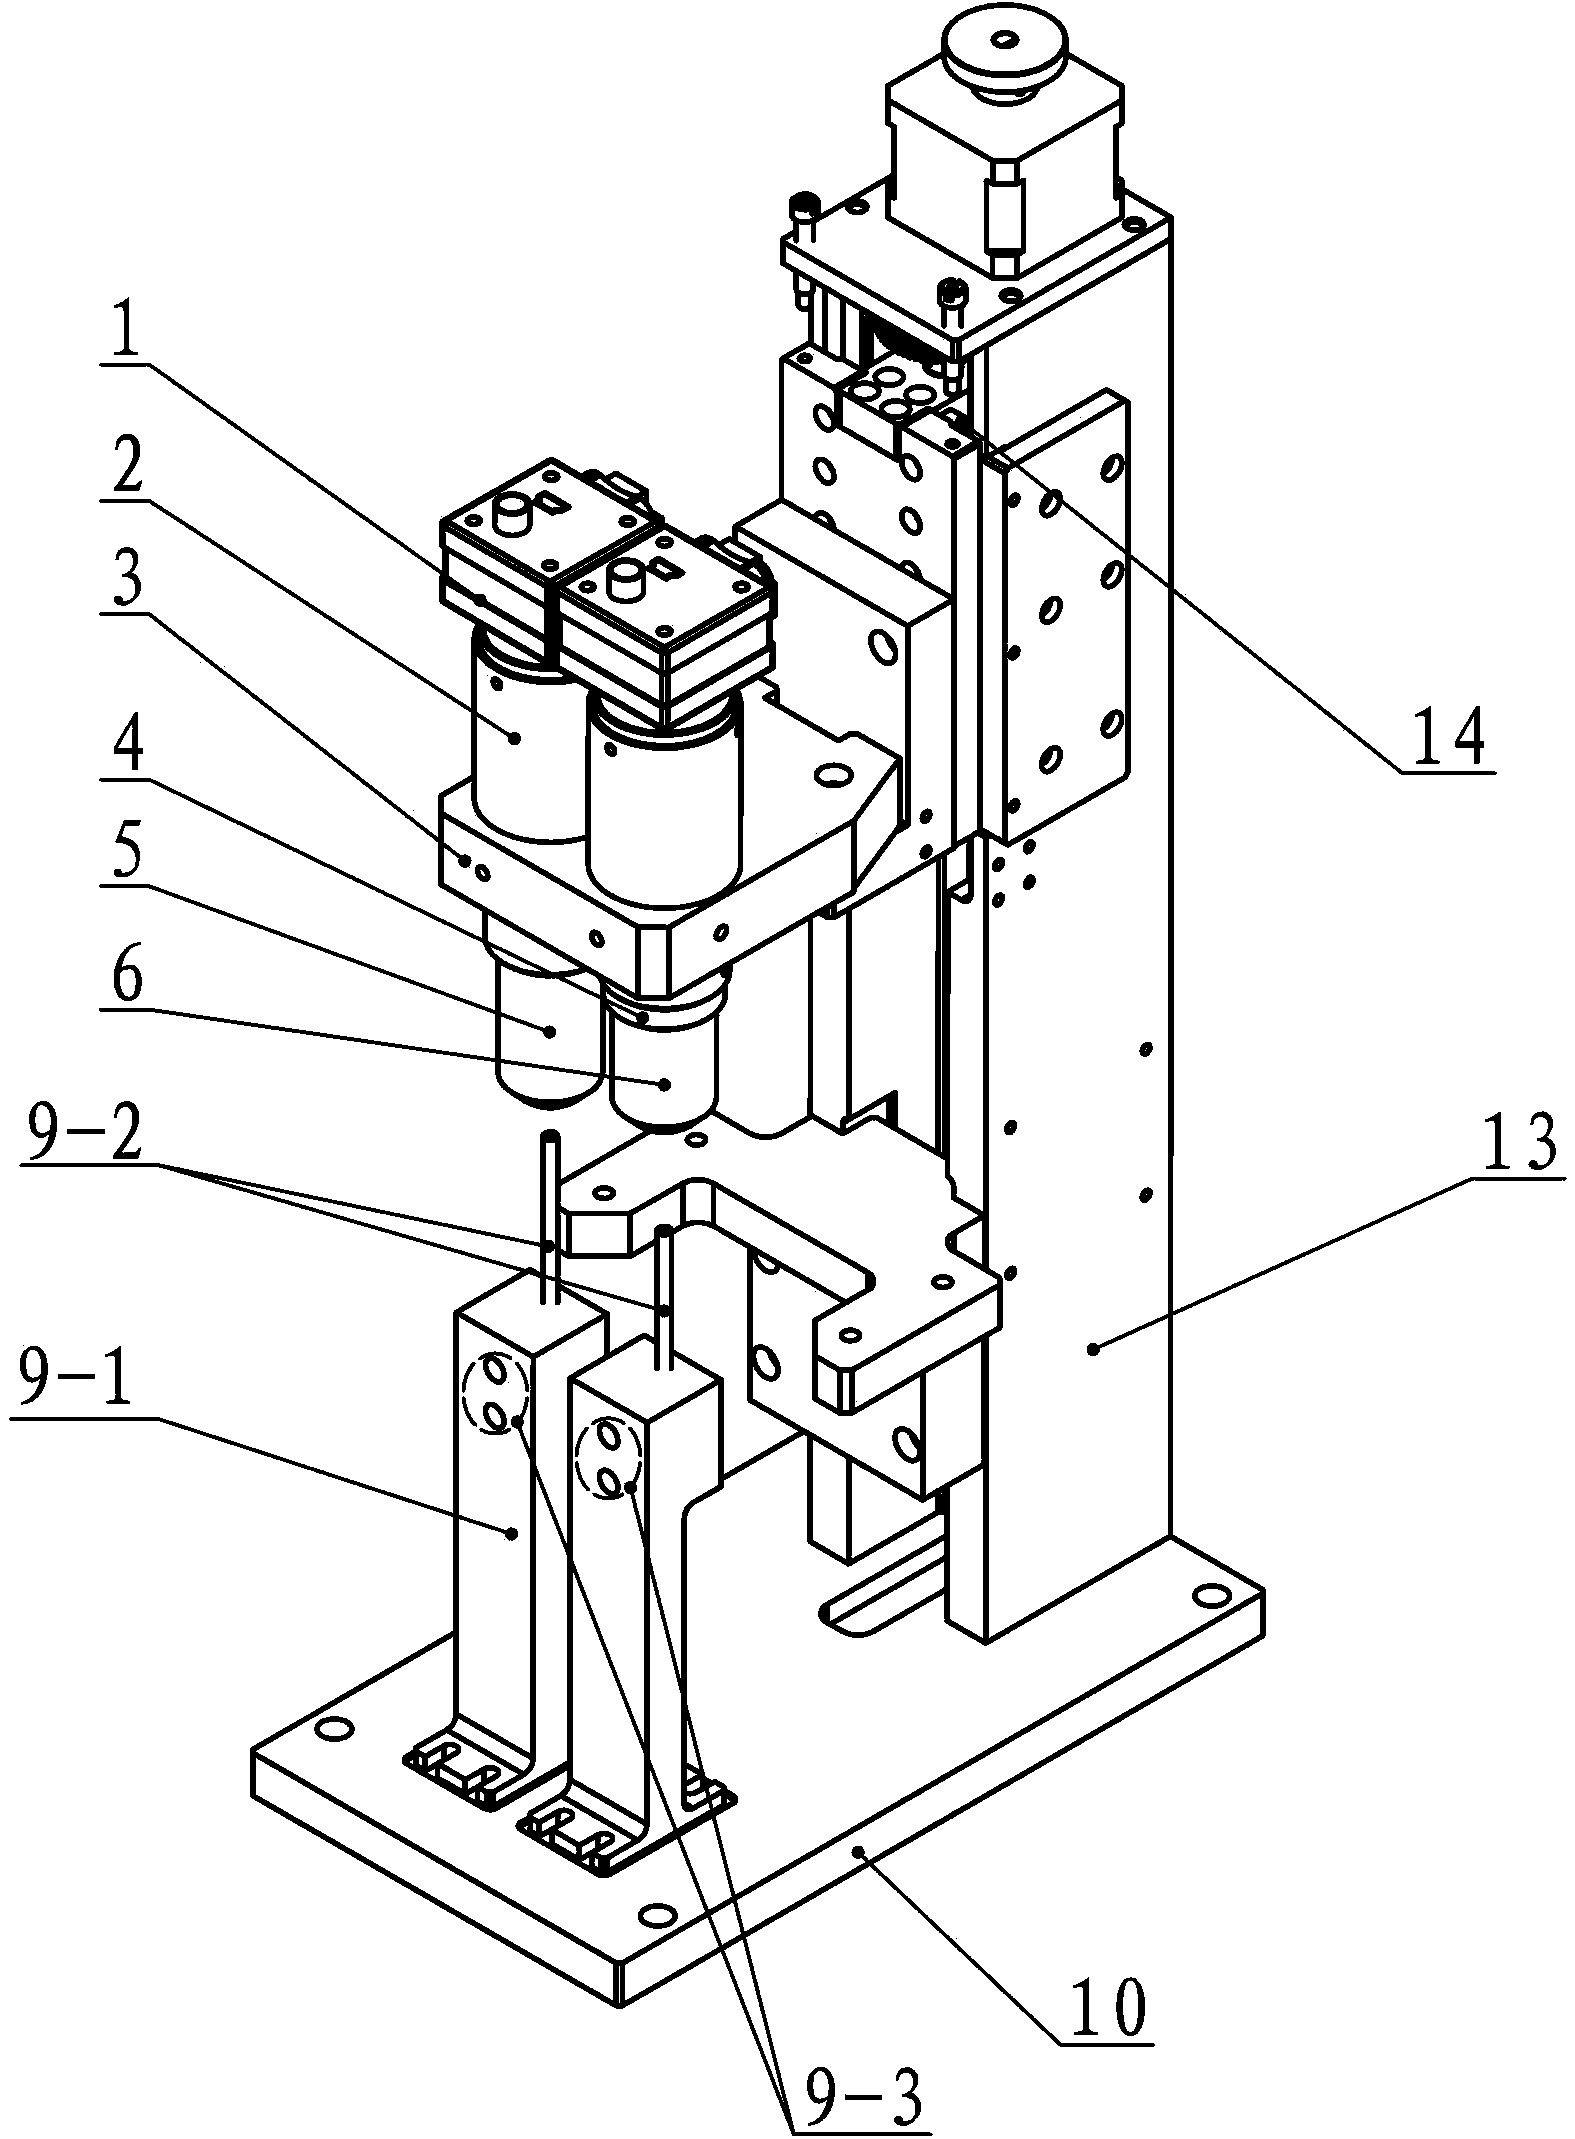 Double-lens-cone microscope device used in urinary sediment inspection equipment